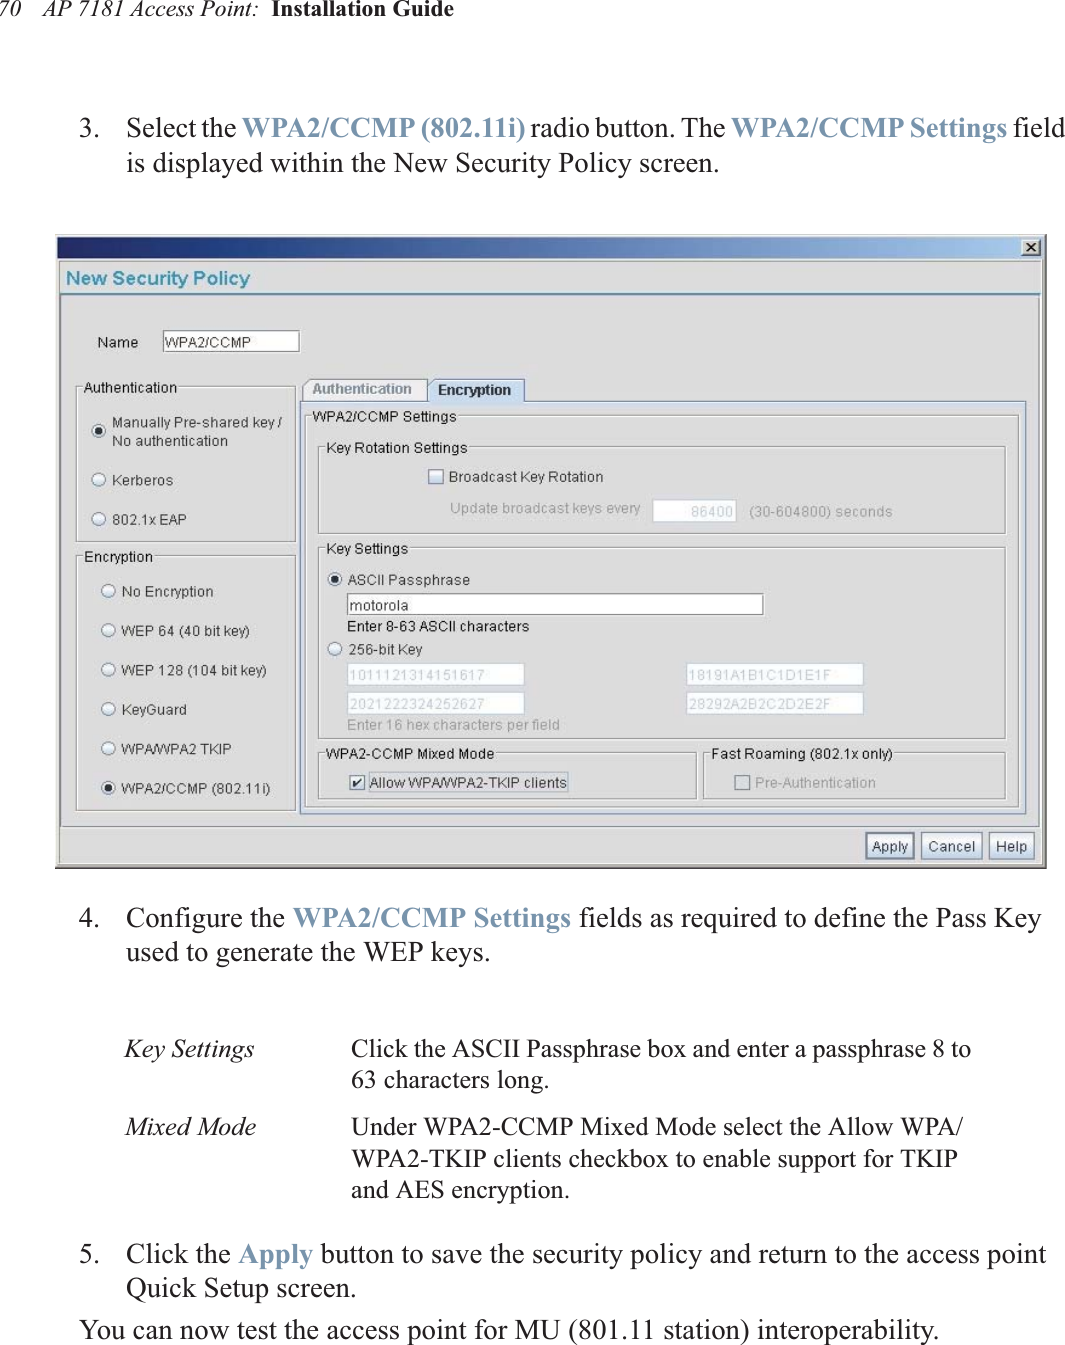 AP 7181 Access Point:  Installation Guide 703. Select the WPA2/CCMP (802.11i) radio button. The WPA2/CCMP Settings field is displayed within the New Security Policy screen.4. Configure the WPA2/CCMP Settings fields as required to define the Pass Key used to generate the WEP keys.5. Click the Apply button to save the security policy and return to the access point Quick Setup screen. You can now test the access point for MU (801.11 station) interoperability.Key Settings Click the ASCII Passphrase box and enter a passphrase 8 to 63 characters long.Mixed Mode Under WPA2-CCMP Mixed Mode select the Allow WPA/WPA2-TKIP clients checkbox to enable support for TKIP and AES encryption.